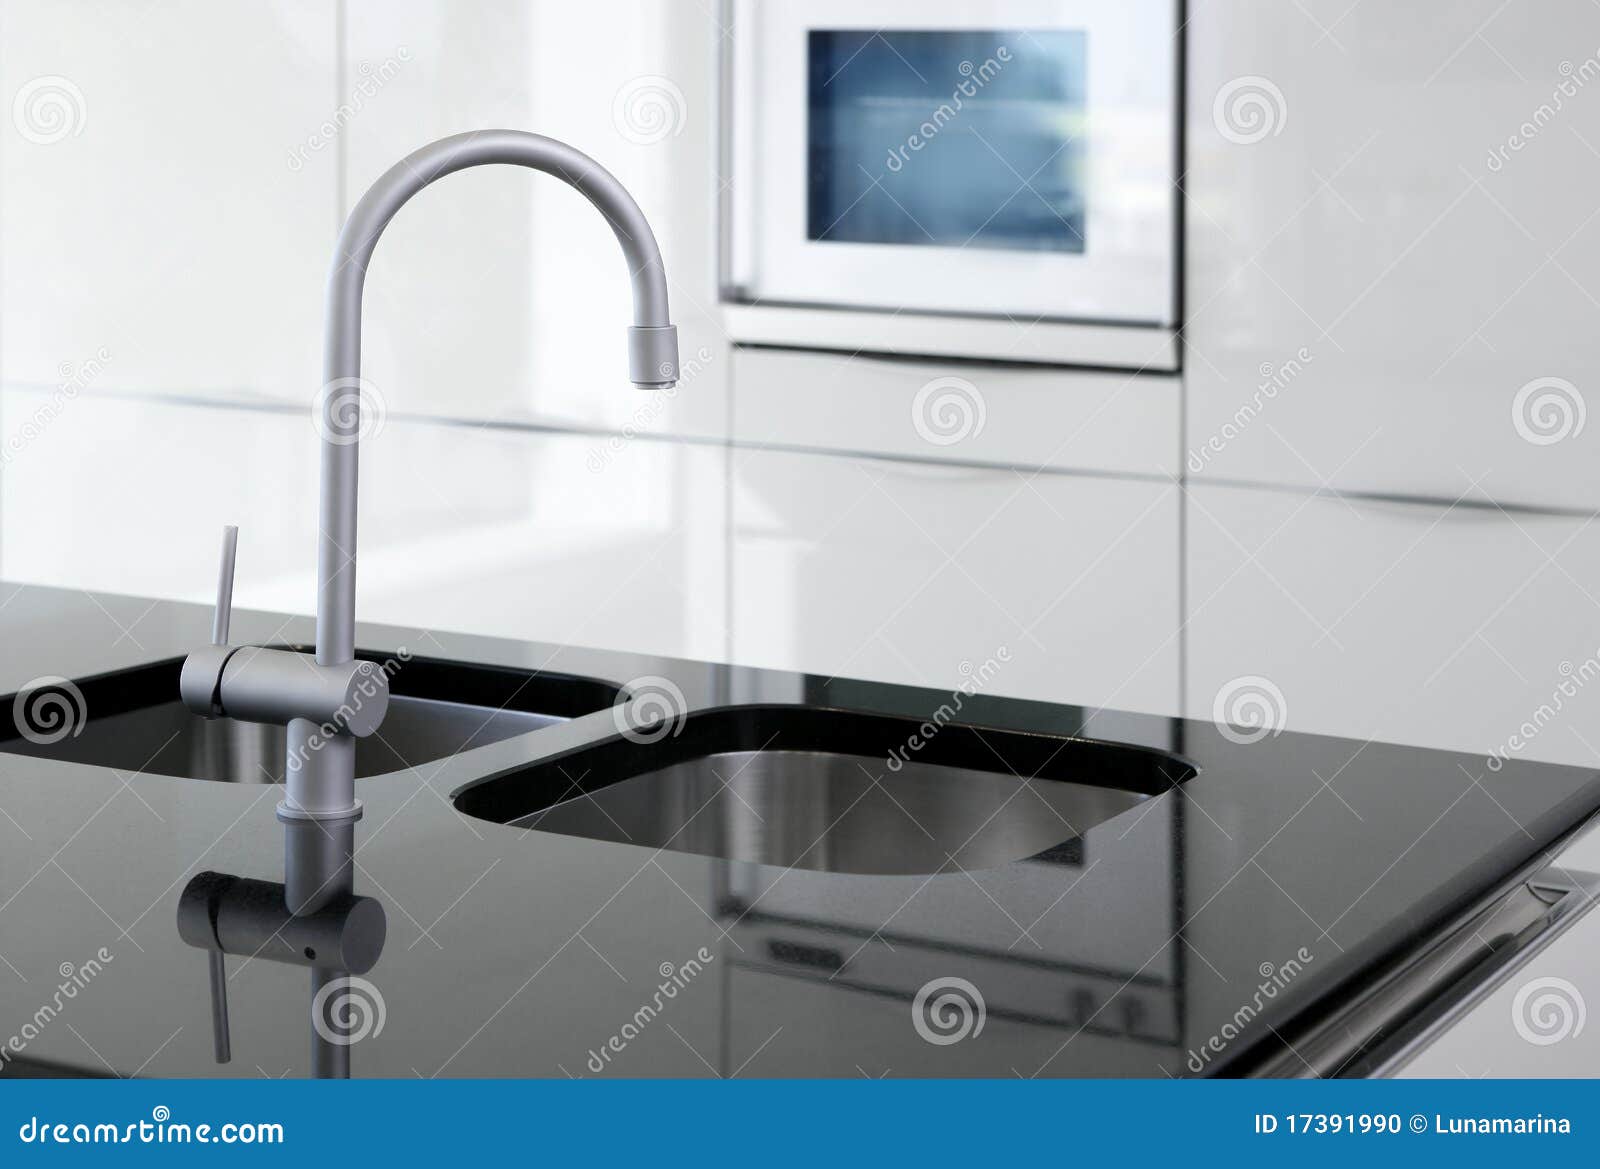 Kitchen Faucet and Oven Modern Black and White Stock Photo - Image of ...